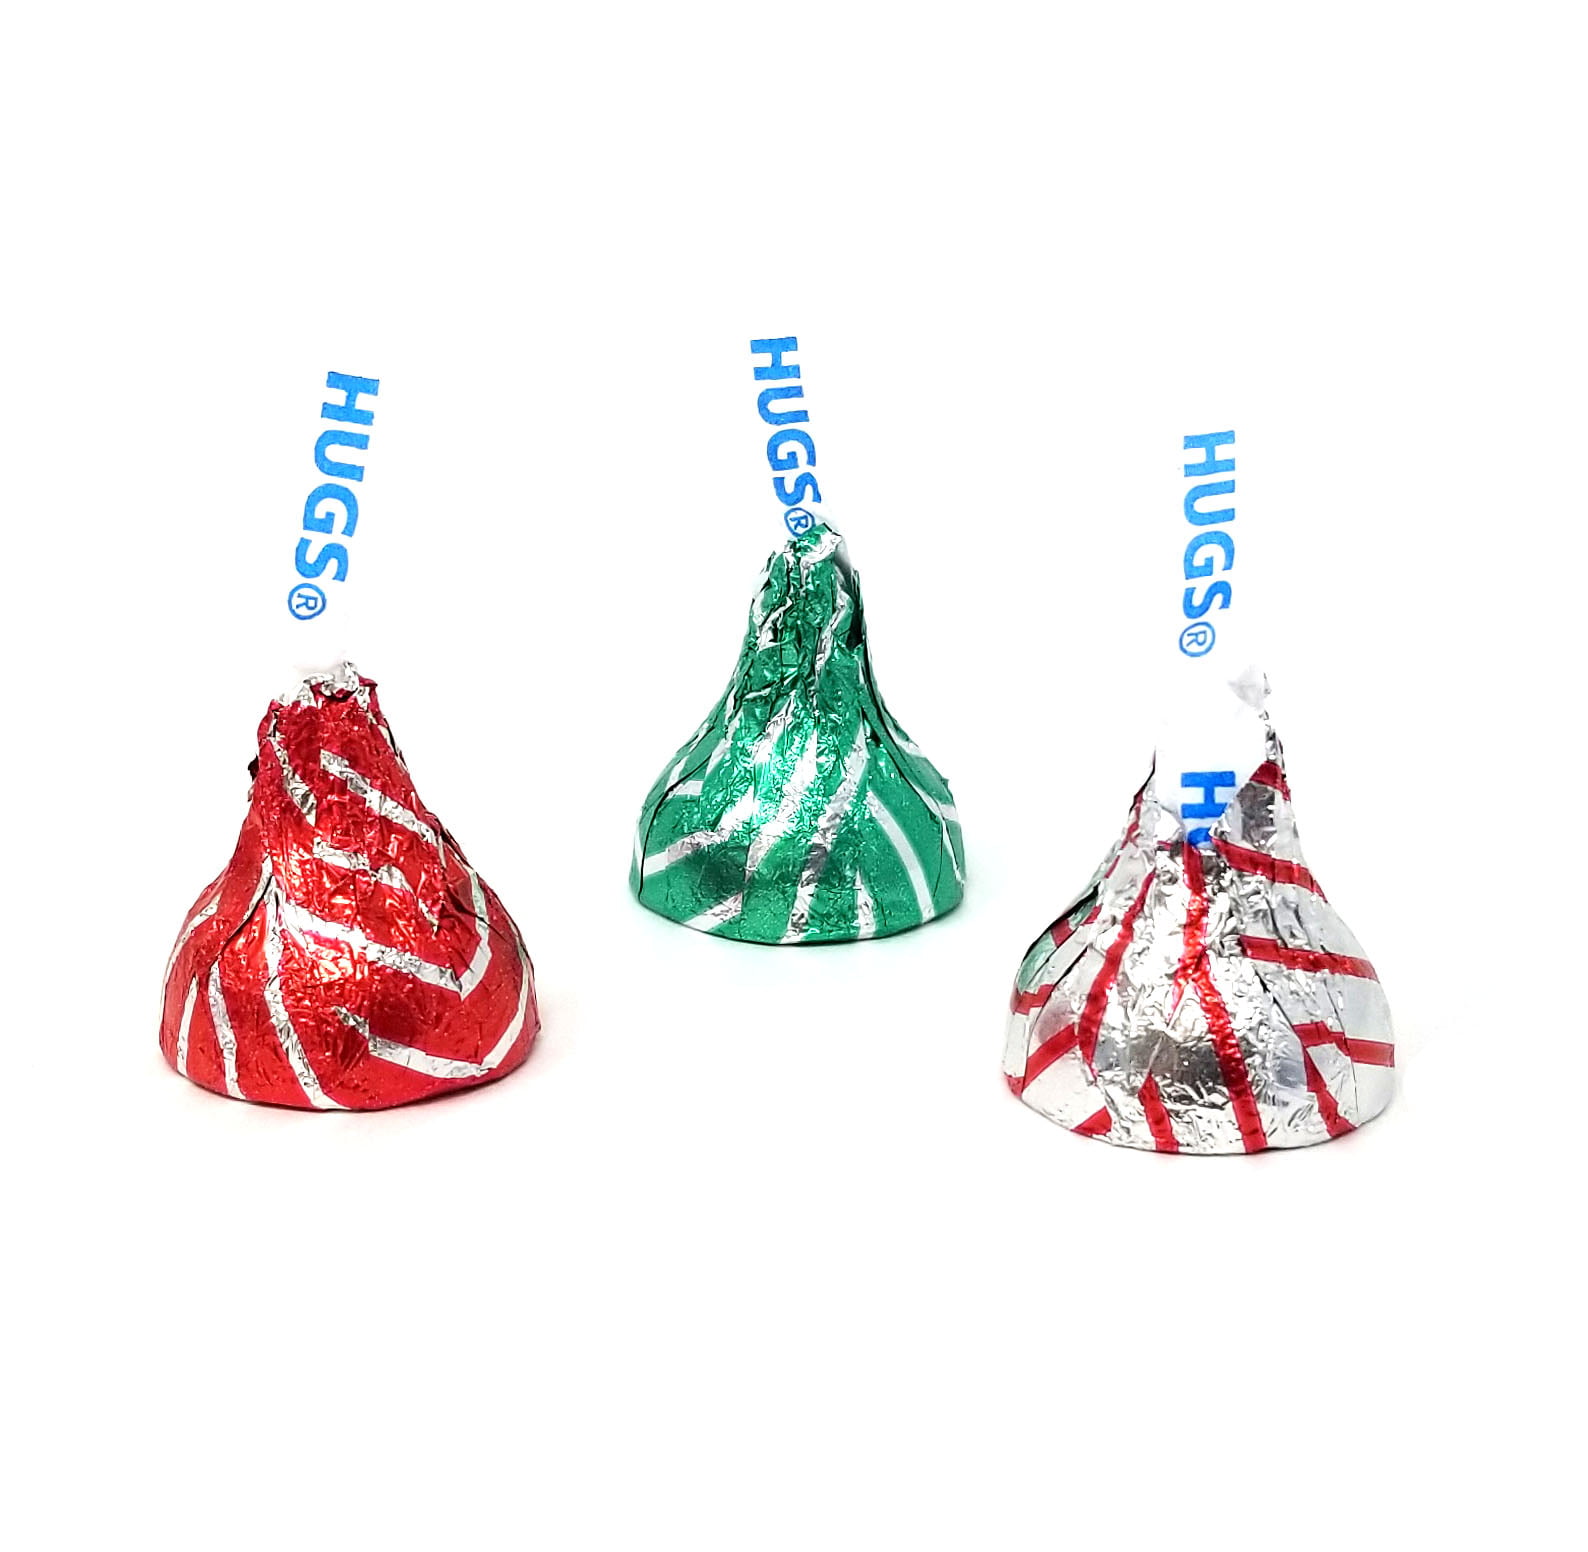 Clip Art by Carrie Teaching First: Chocolate Hugs and Kisses - Clip Art ...